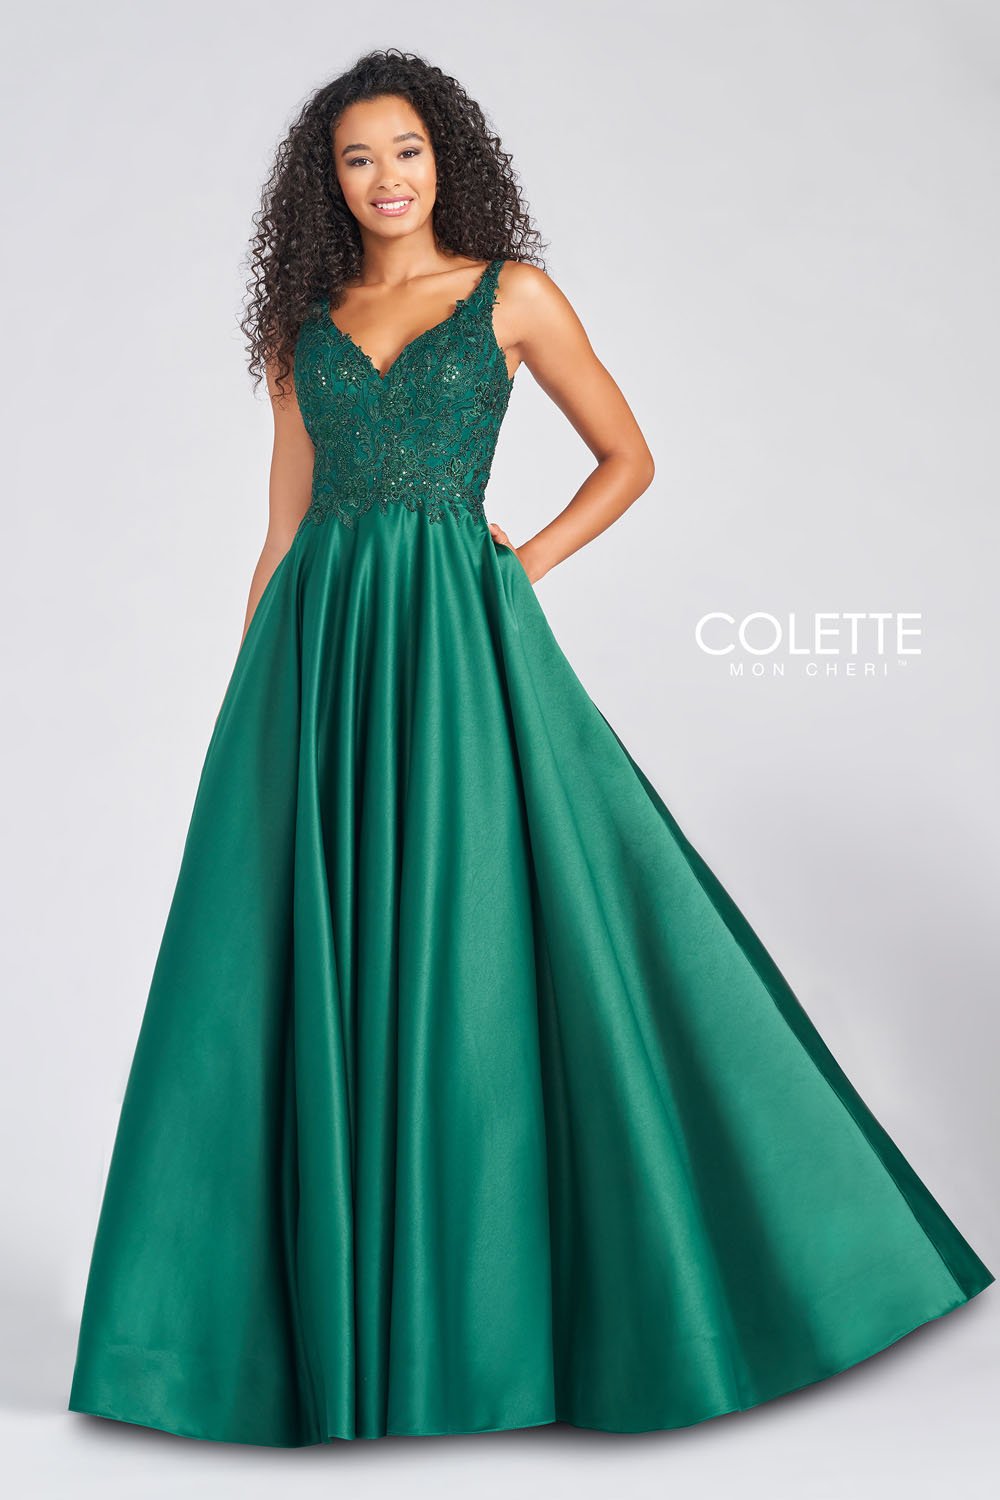 Colette CL12271 Emerald prom dresses.  Emerald prom dresses image by Colette.